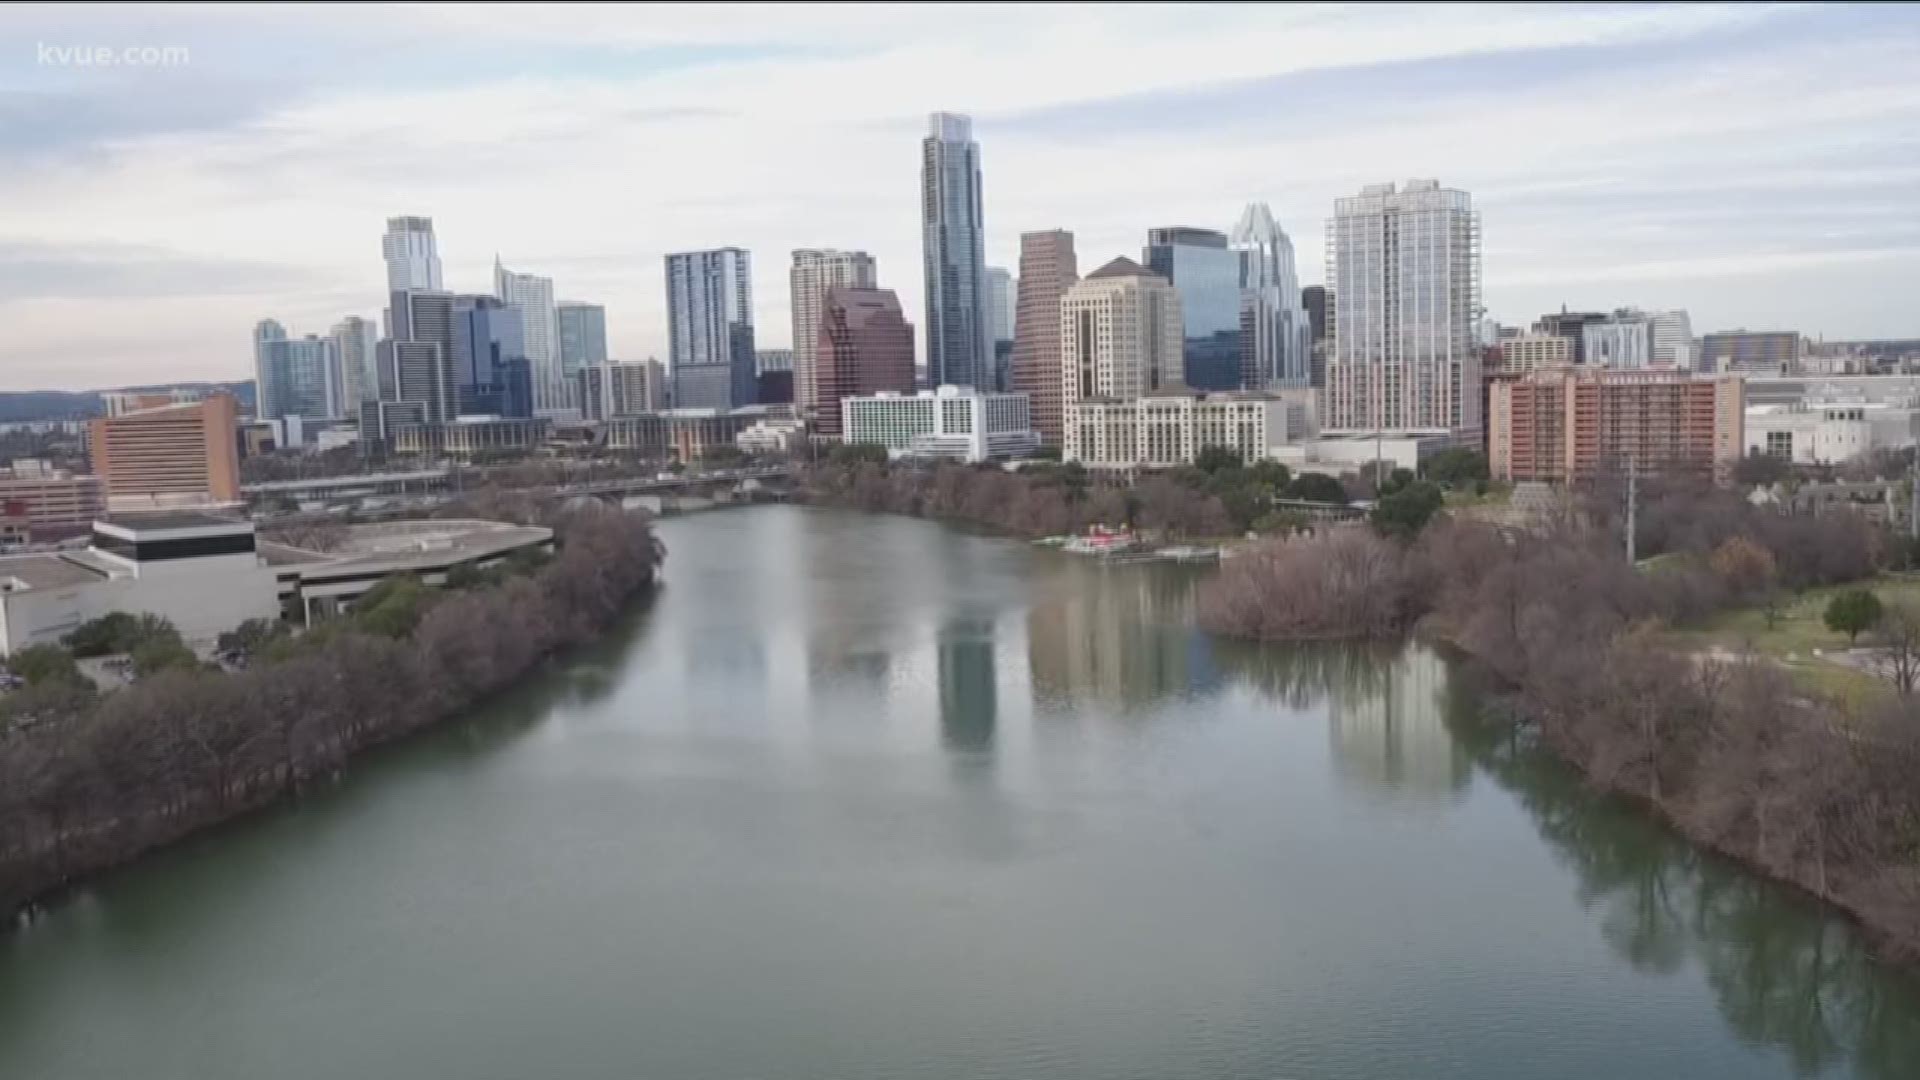 A type of bacteria that's very harmful to pets could be lurking in Lady Bird Lake.